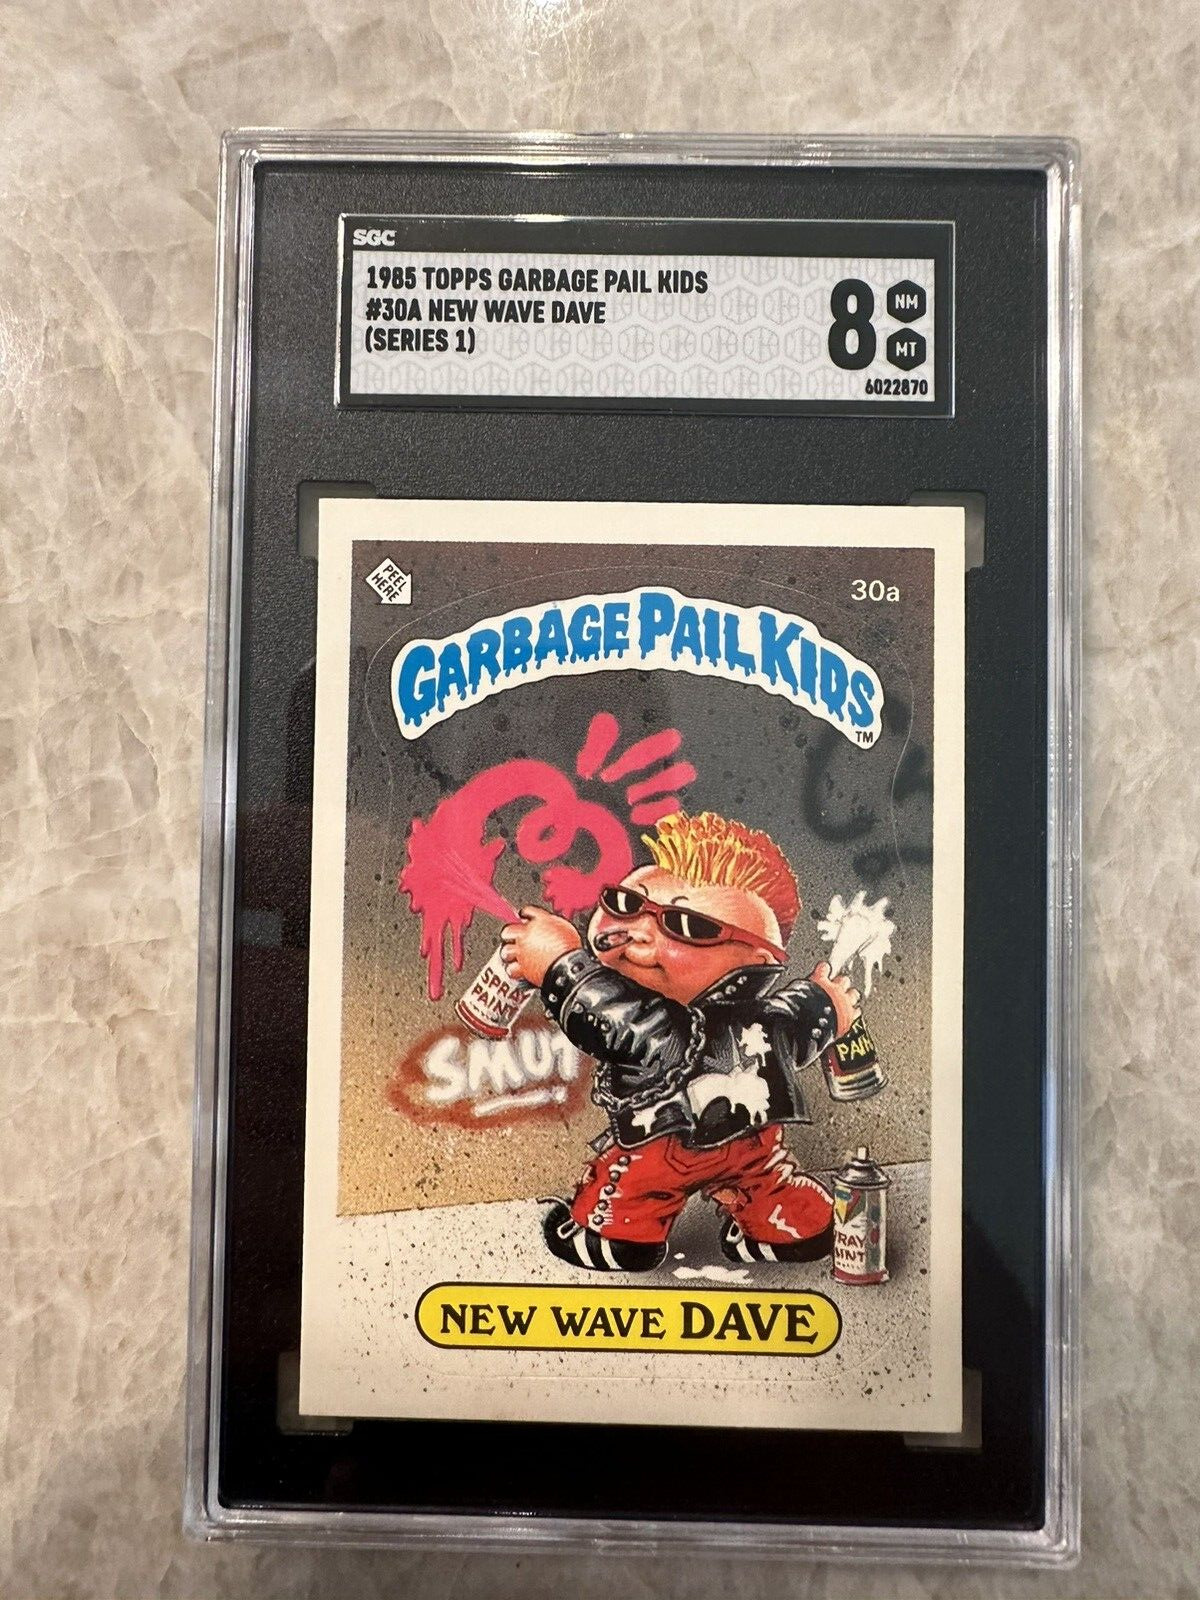 1985 Topps Garbage Pail Kids #30a New Wave Dave Series 1 Trading Card SGC 8 NM